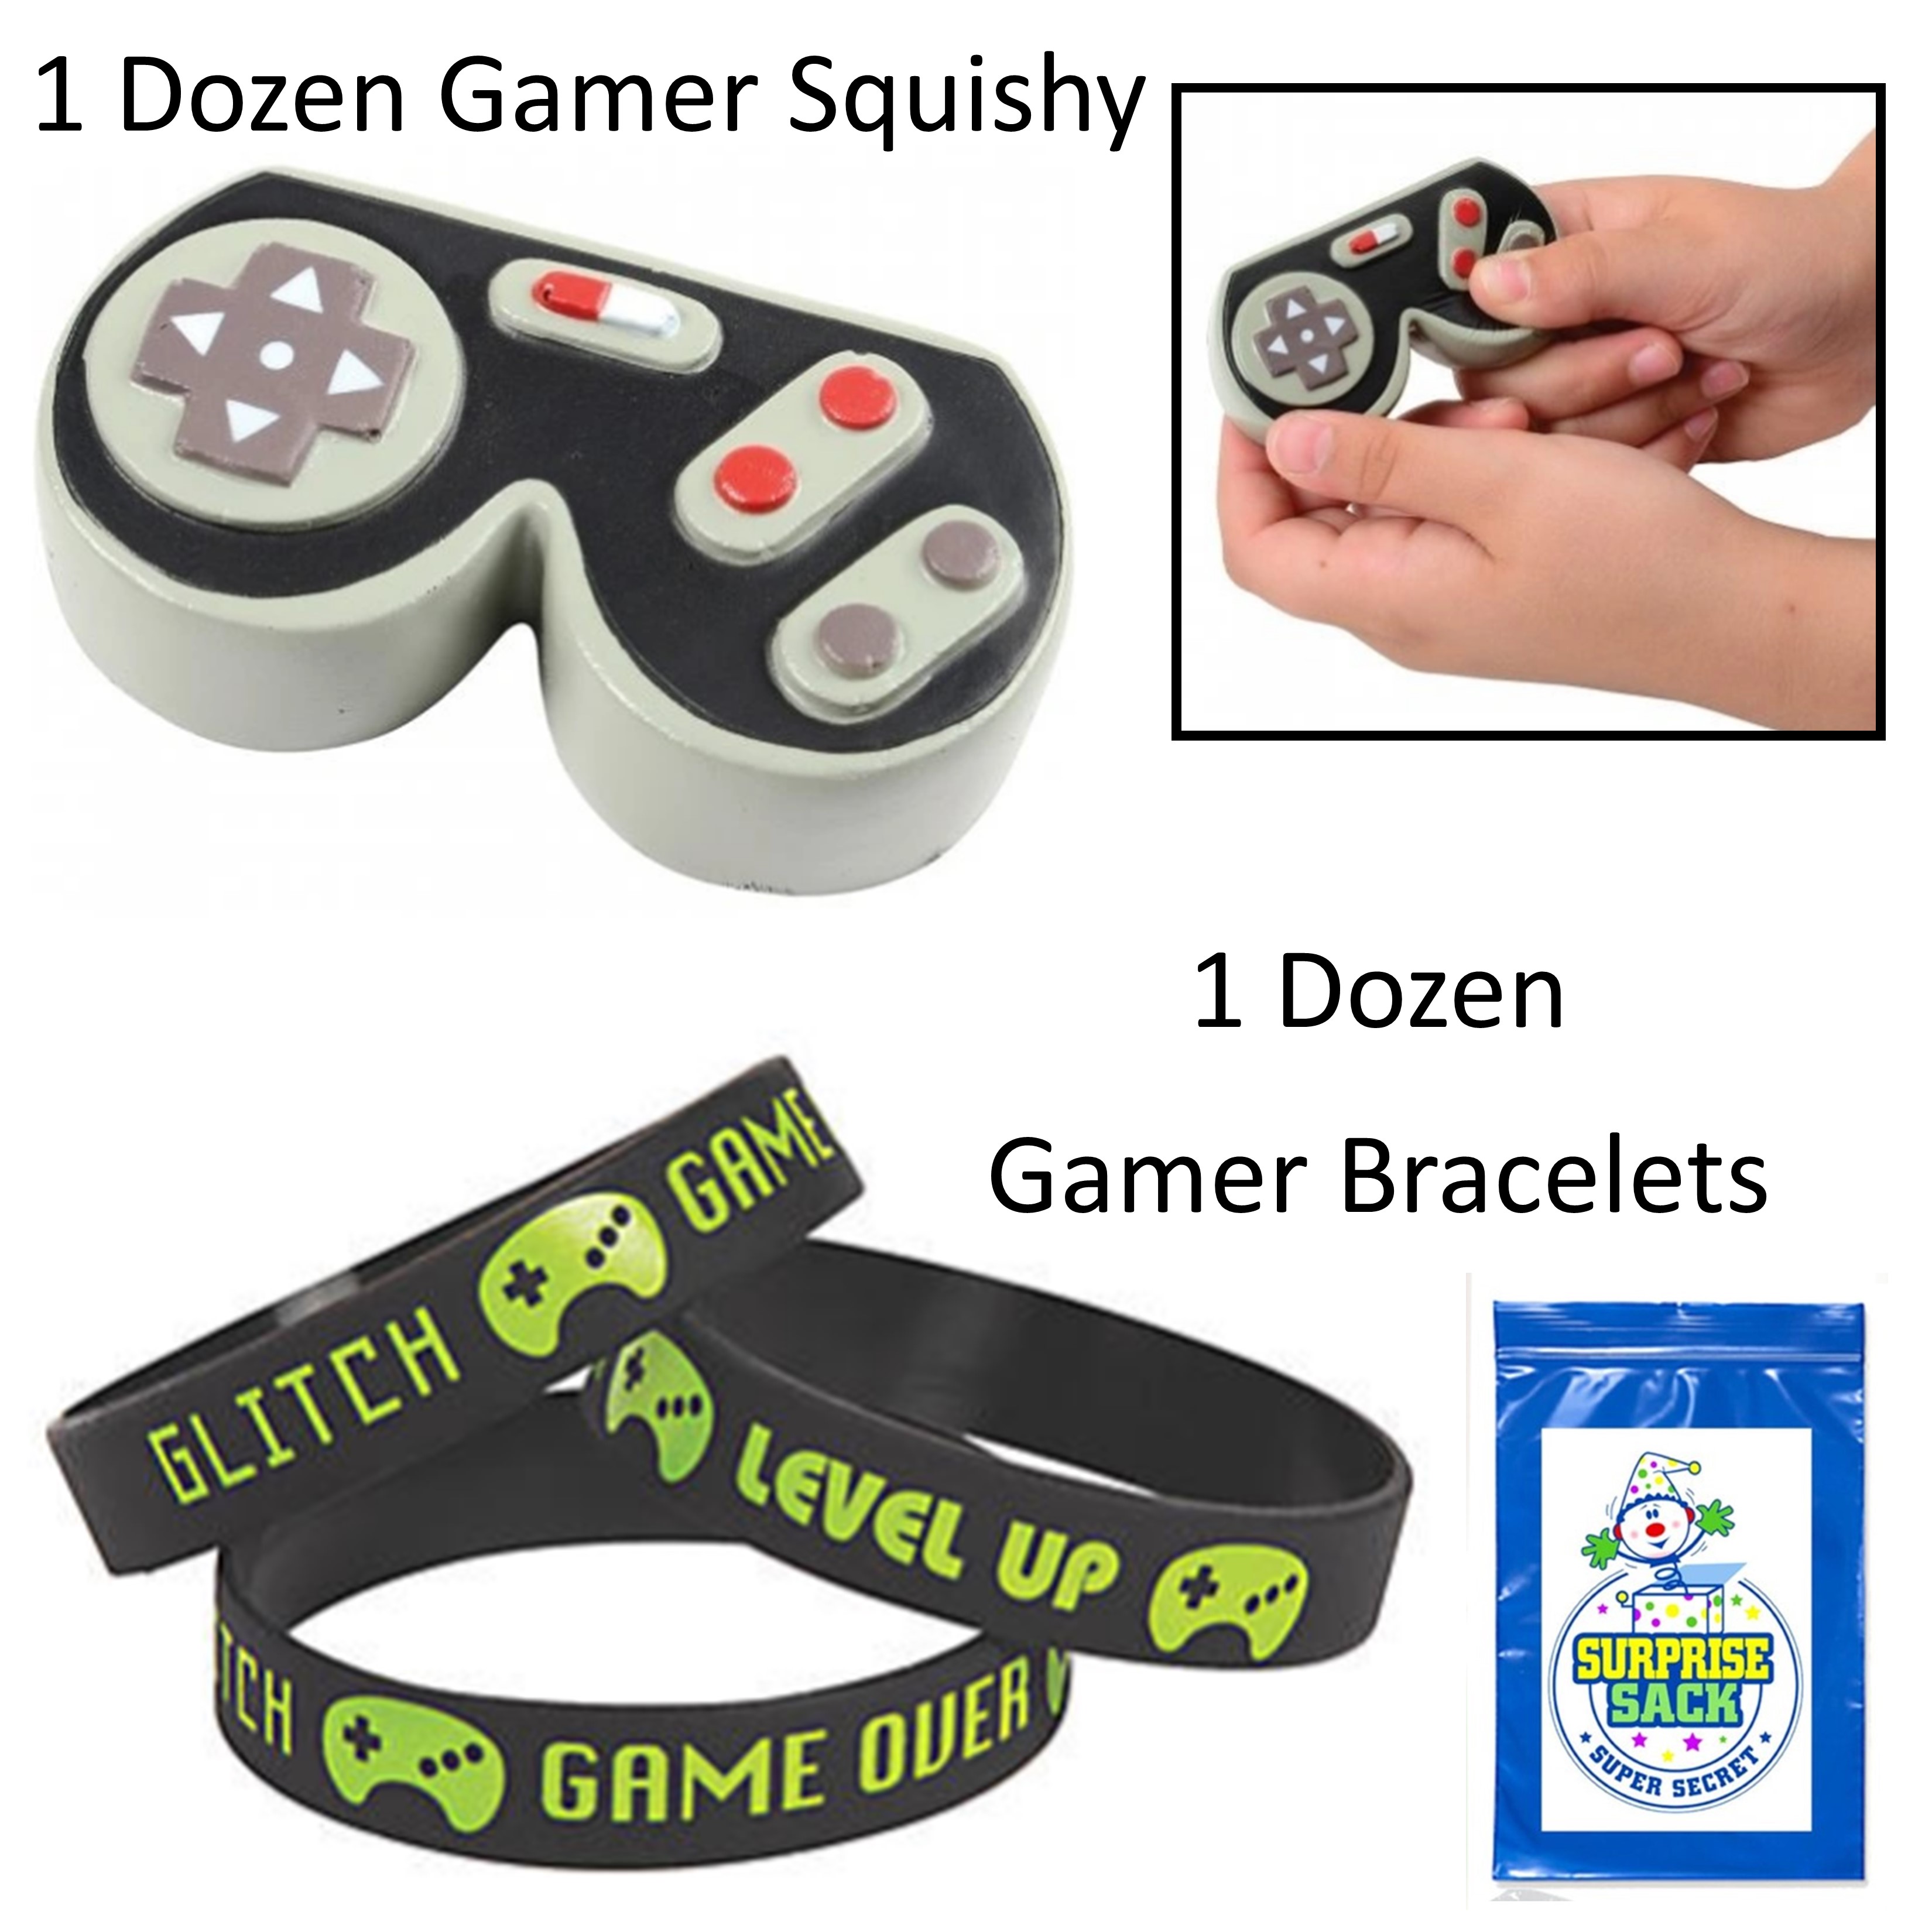 12 Game Controller Squishy Stress Toys & 12 Gamer Bracelets - Video Game Birthday  Party Favors & Supplies for Kids, Tweens or Teens Goodie Bags 